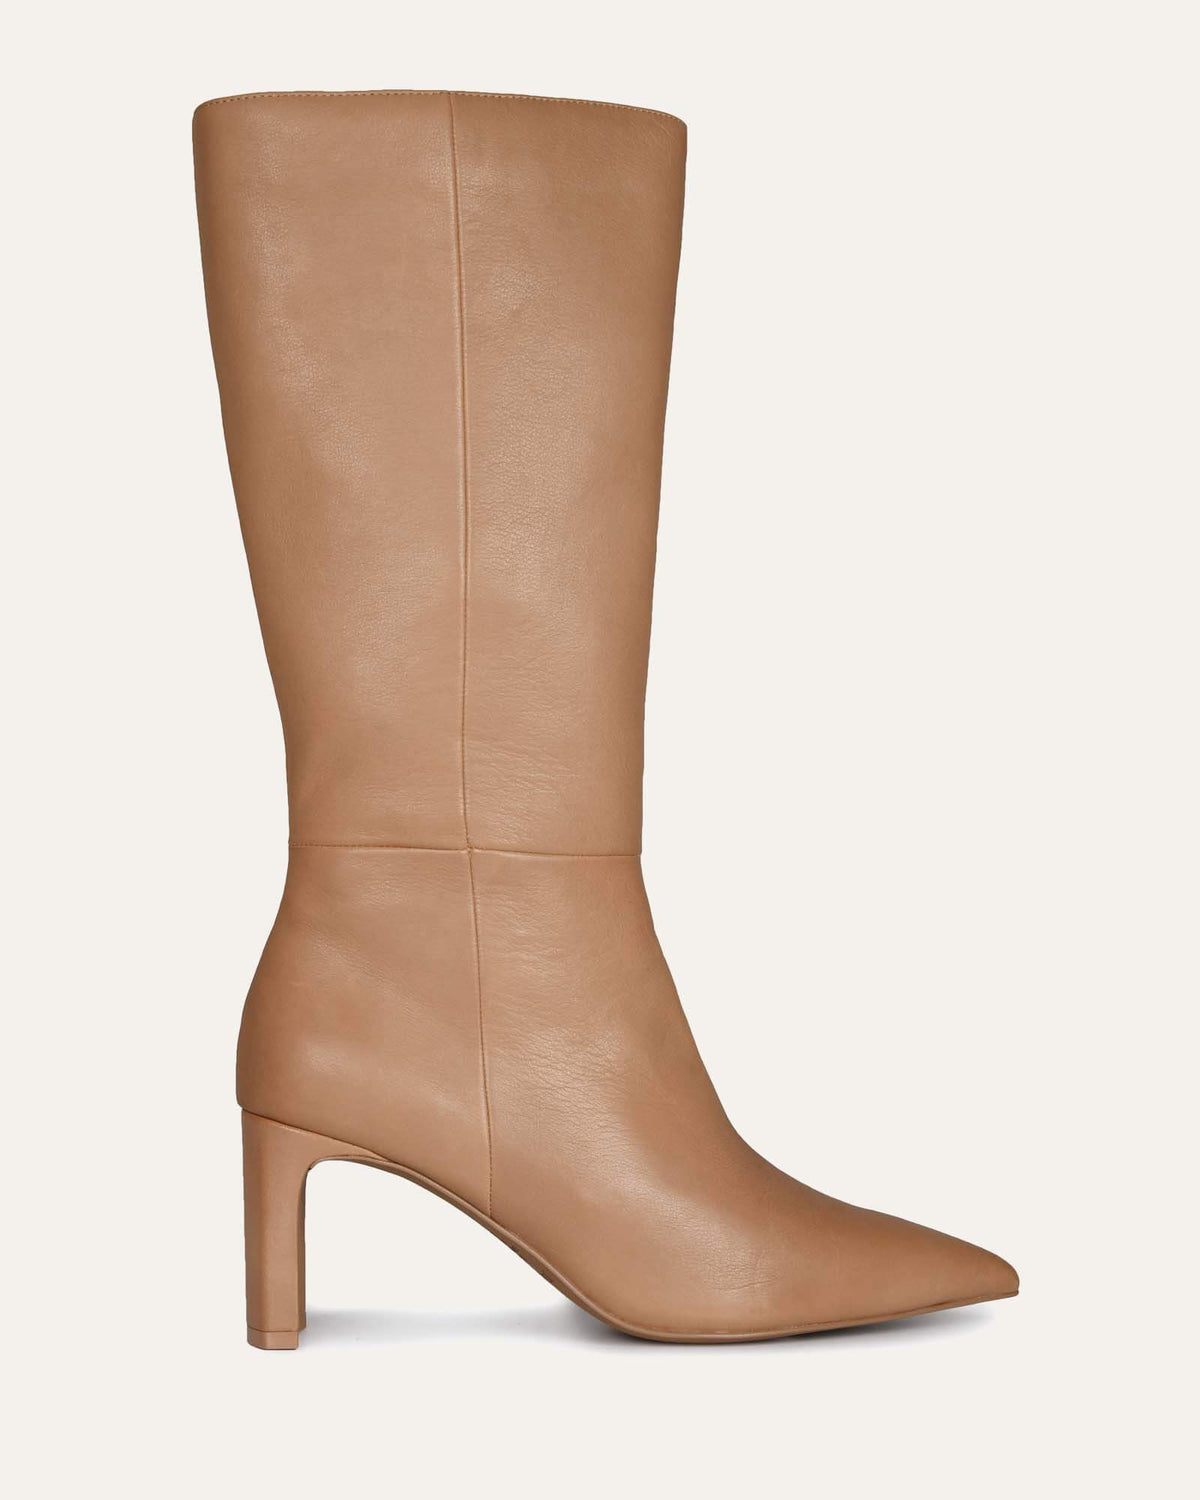 PIXIE CALF BOOTS BEIGE LEATHER